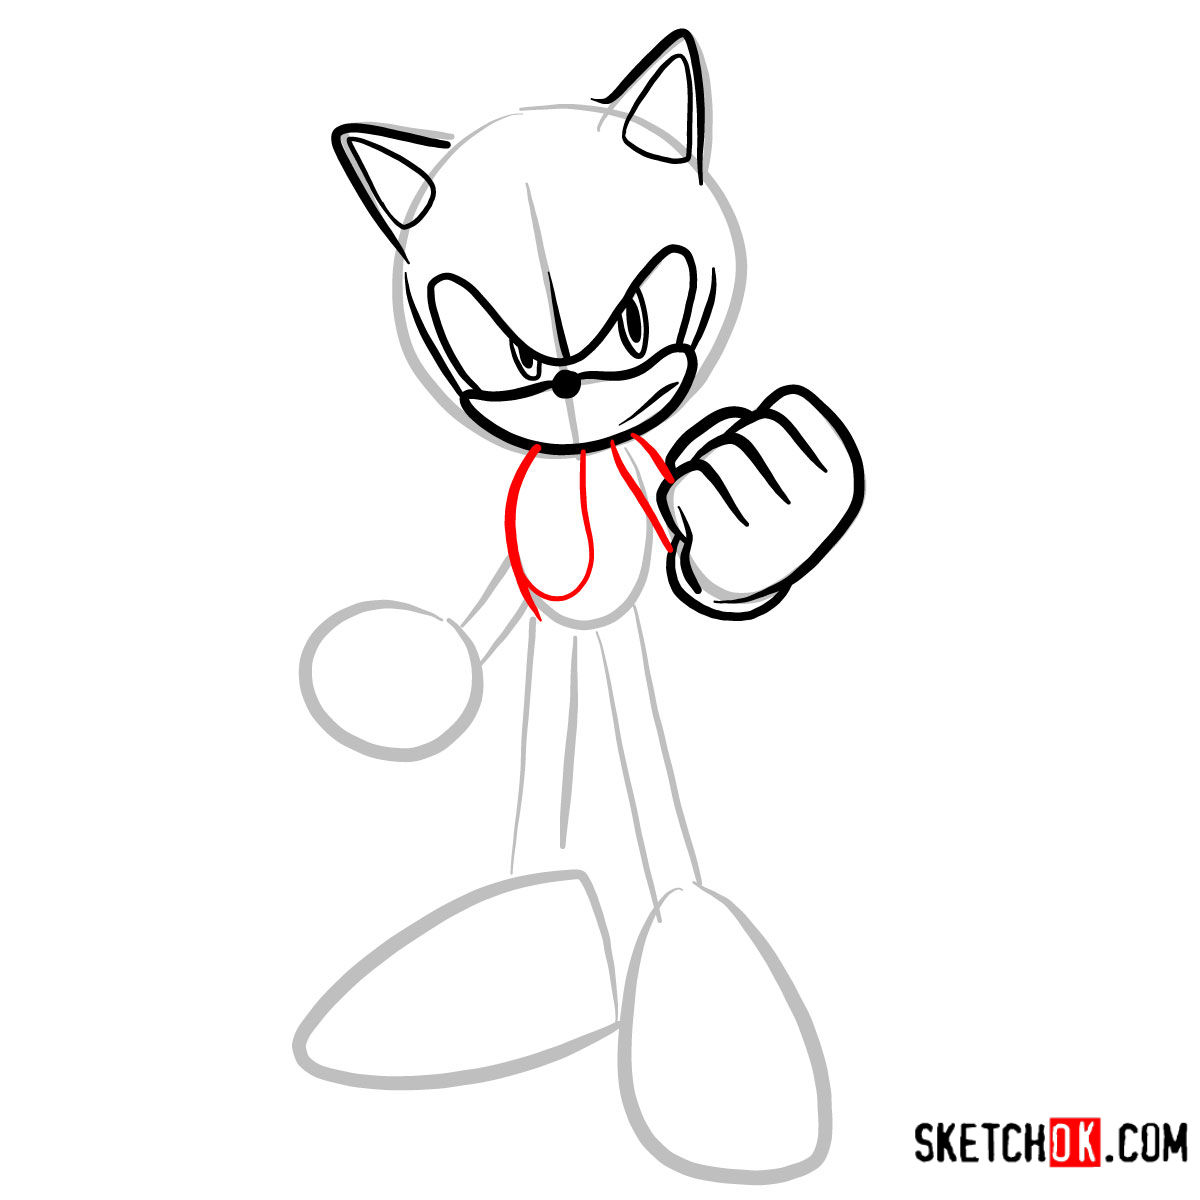 How to draw Sonic the Hedgehog - step 05